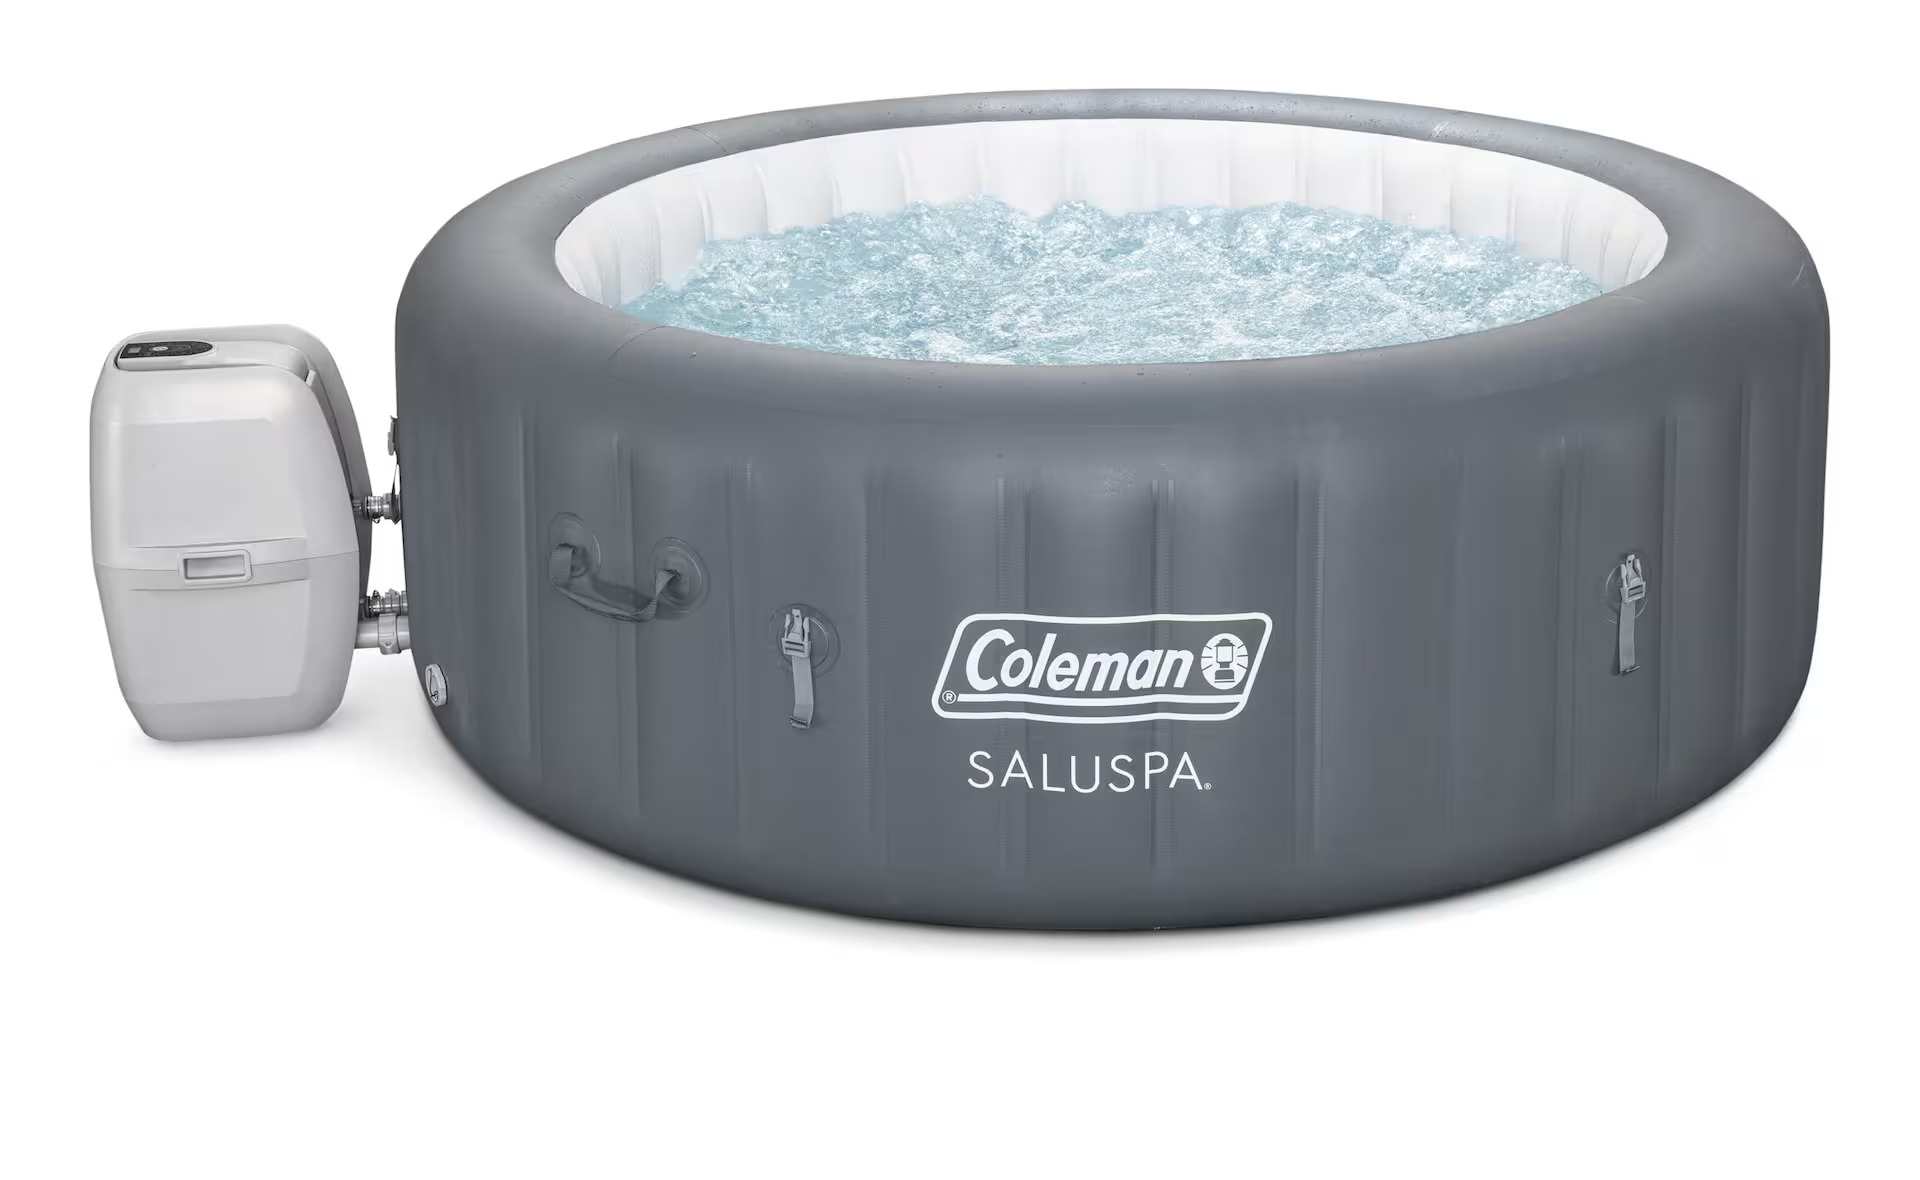 How To Set Up A Coleman Inflatable Hot Tub